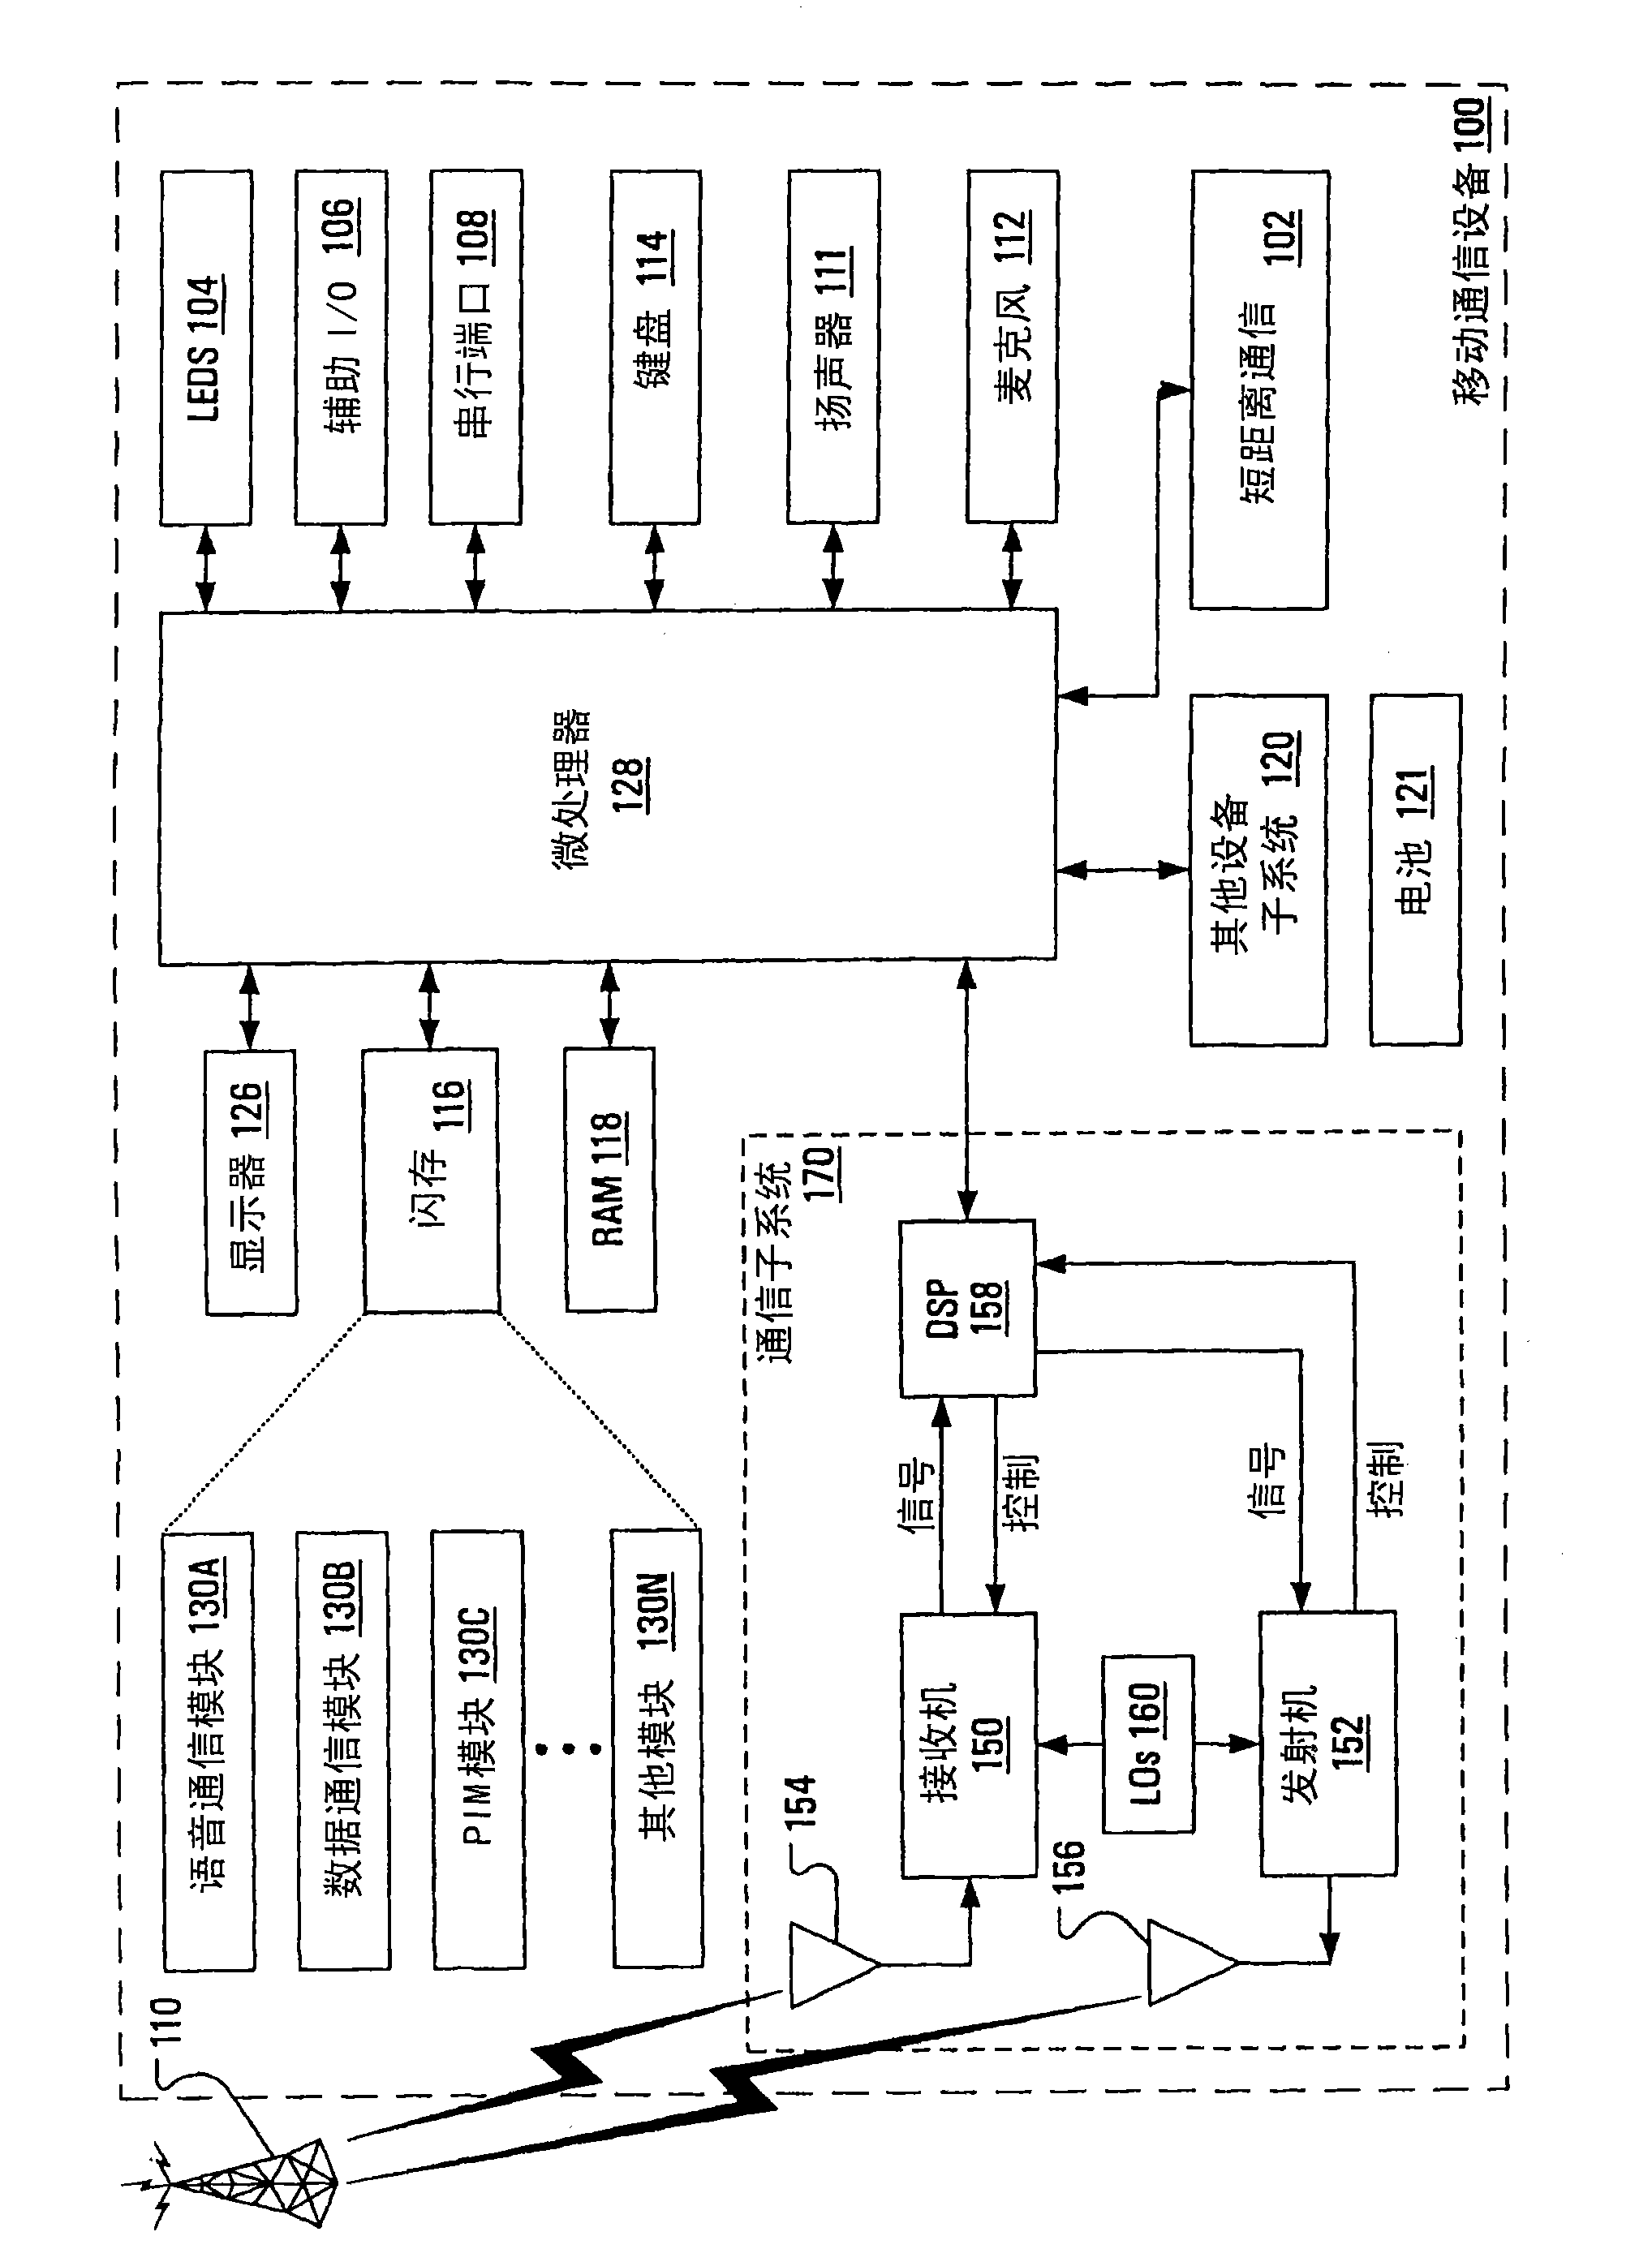 System and method for wireless network selection by multi-mode devices